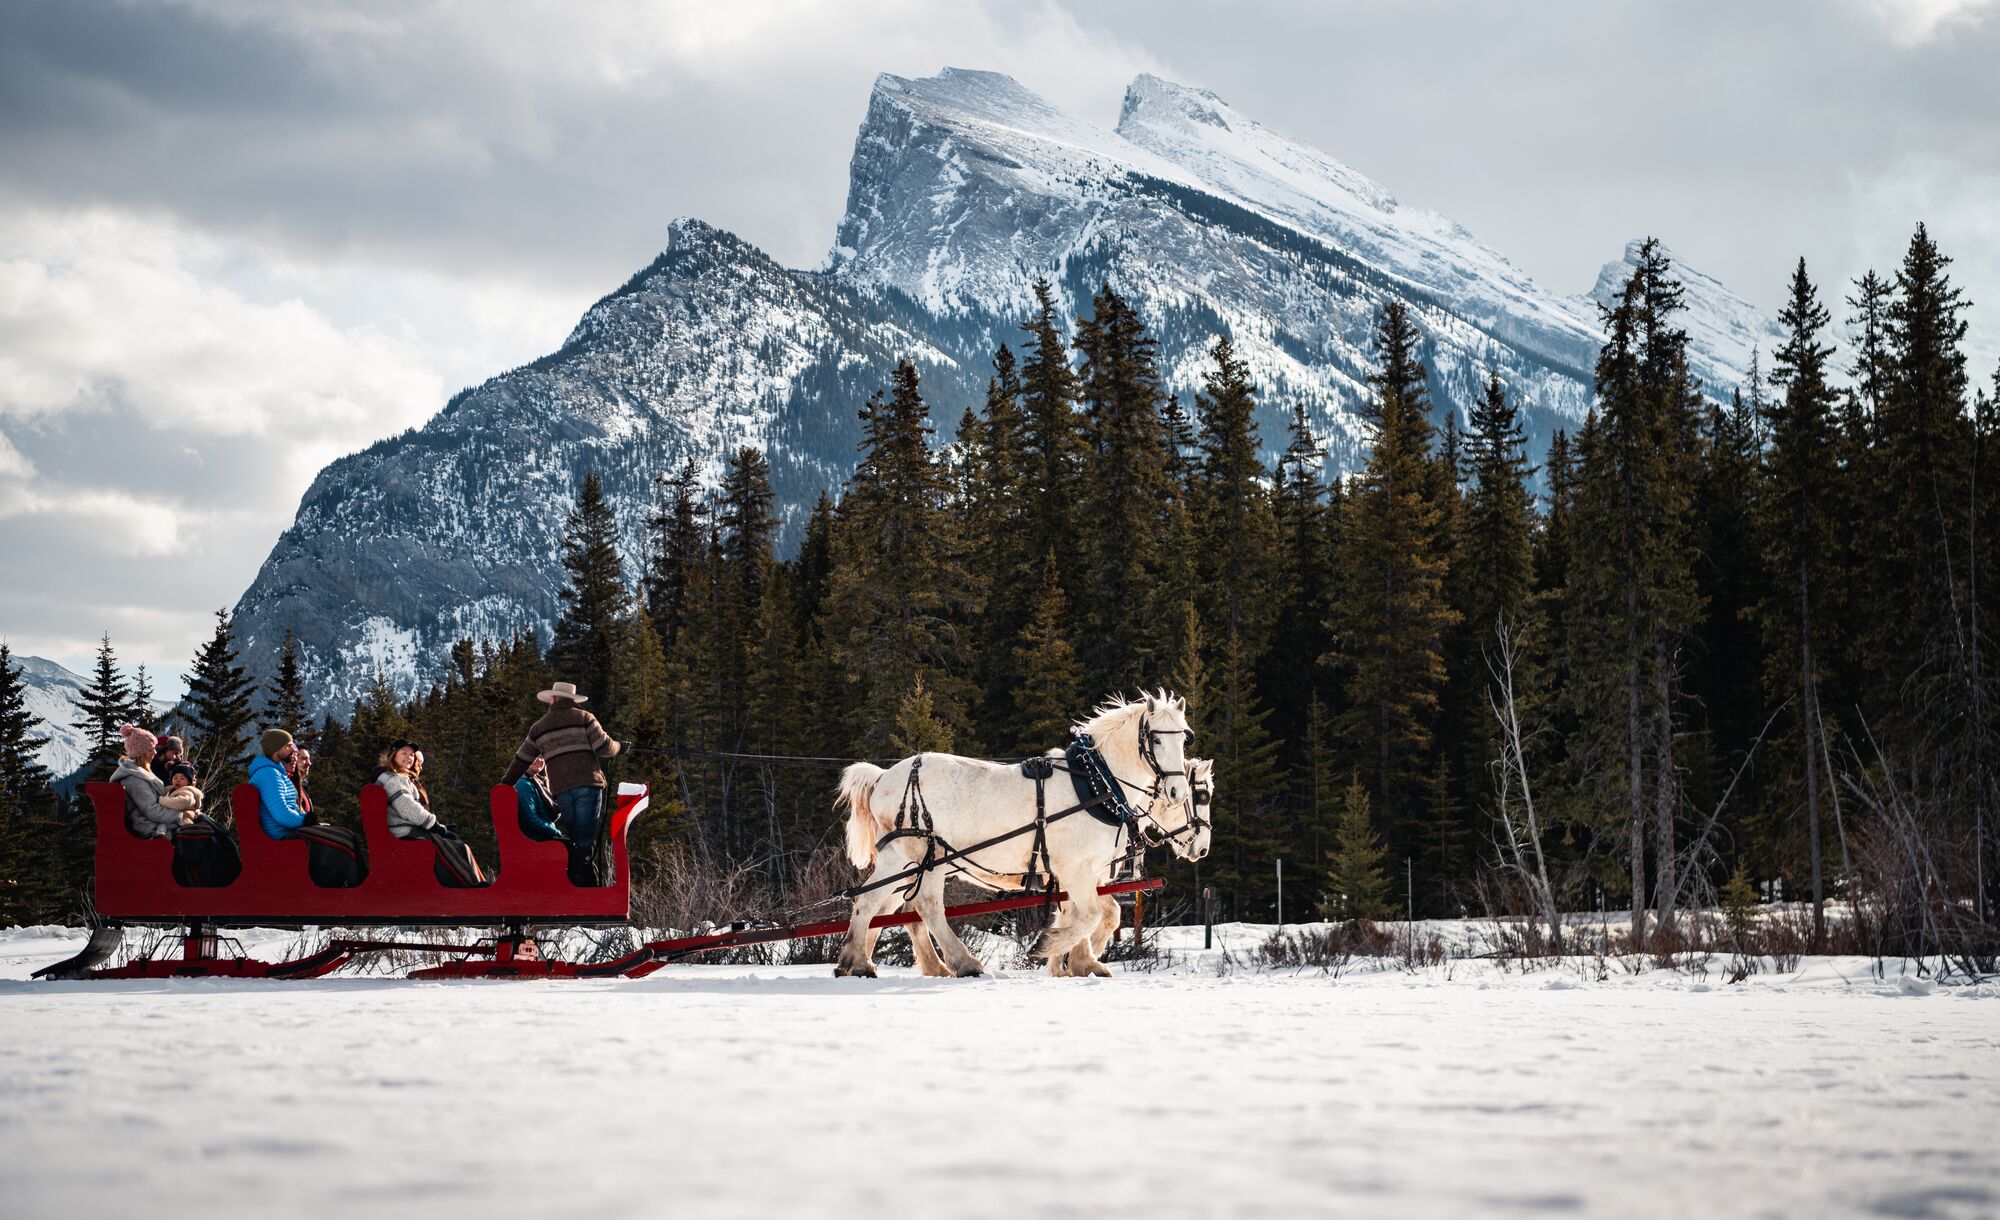 A sleigh ride underneath Mount Rundle in Banff National Park.